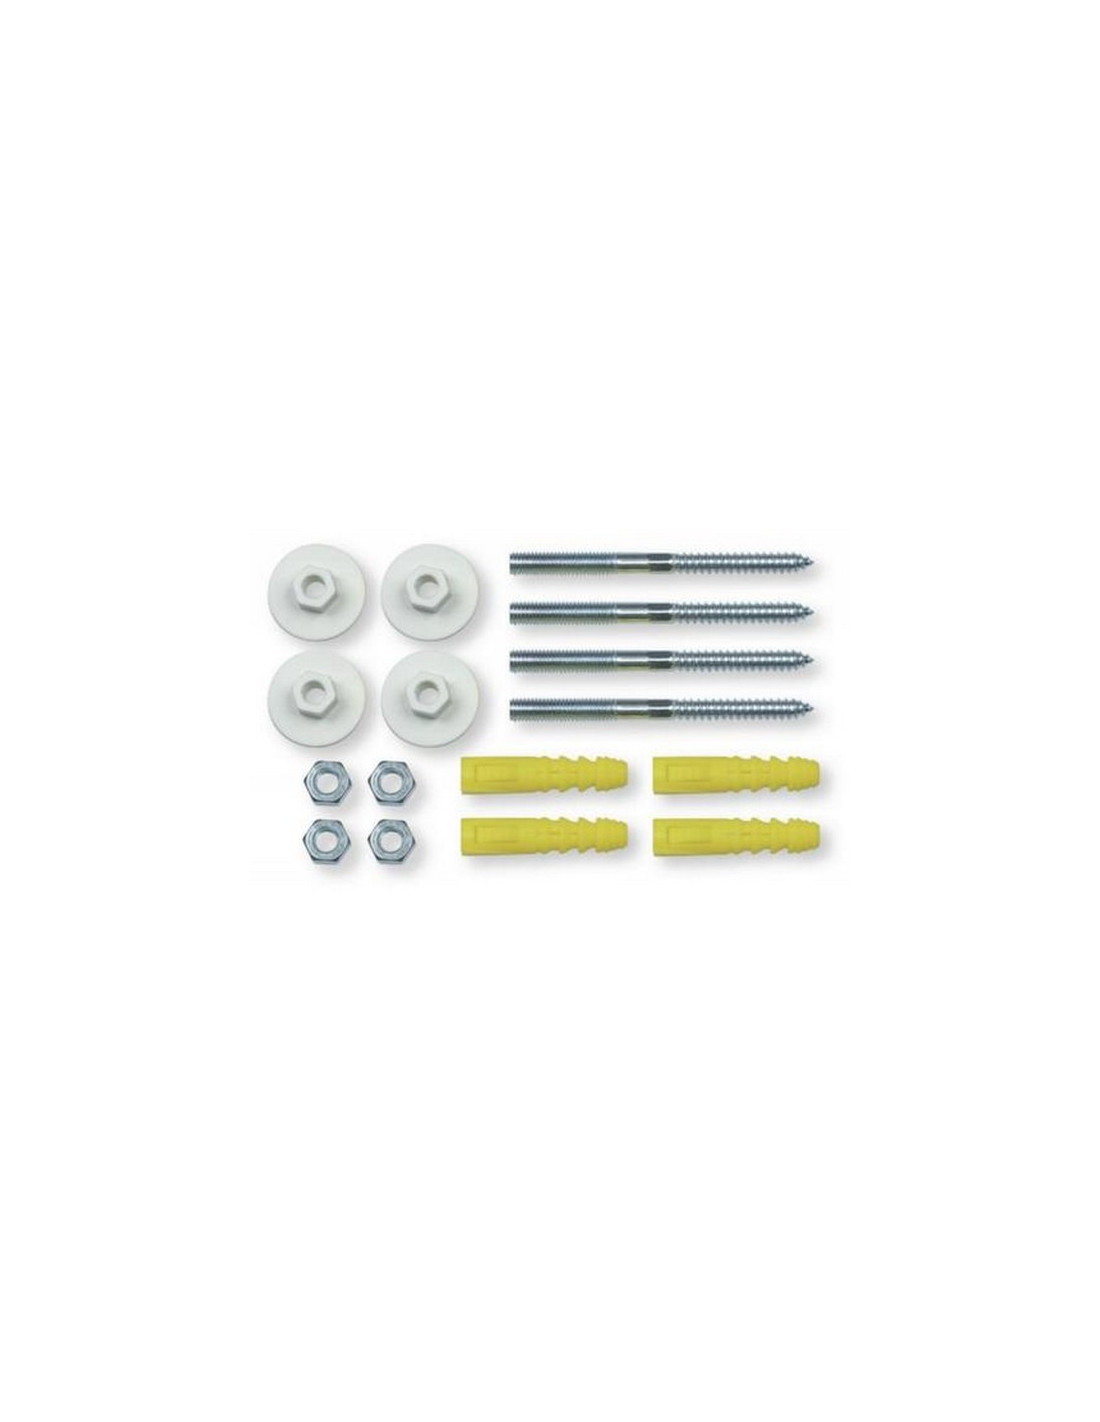 KIT FIXATION WC INOXYDABLE (VERTICAL) · 2 VIS DOUBLE FILET